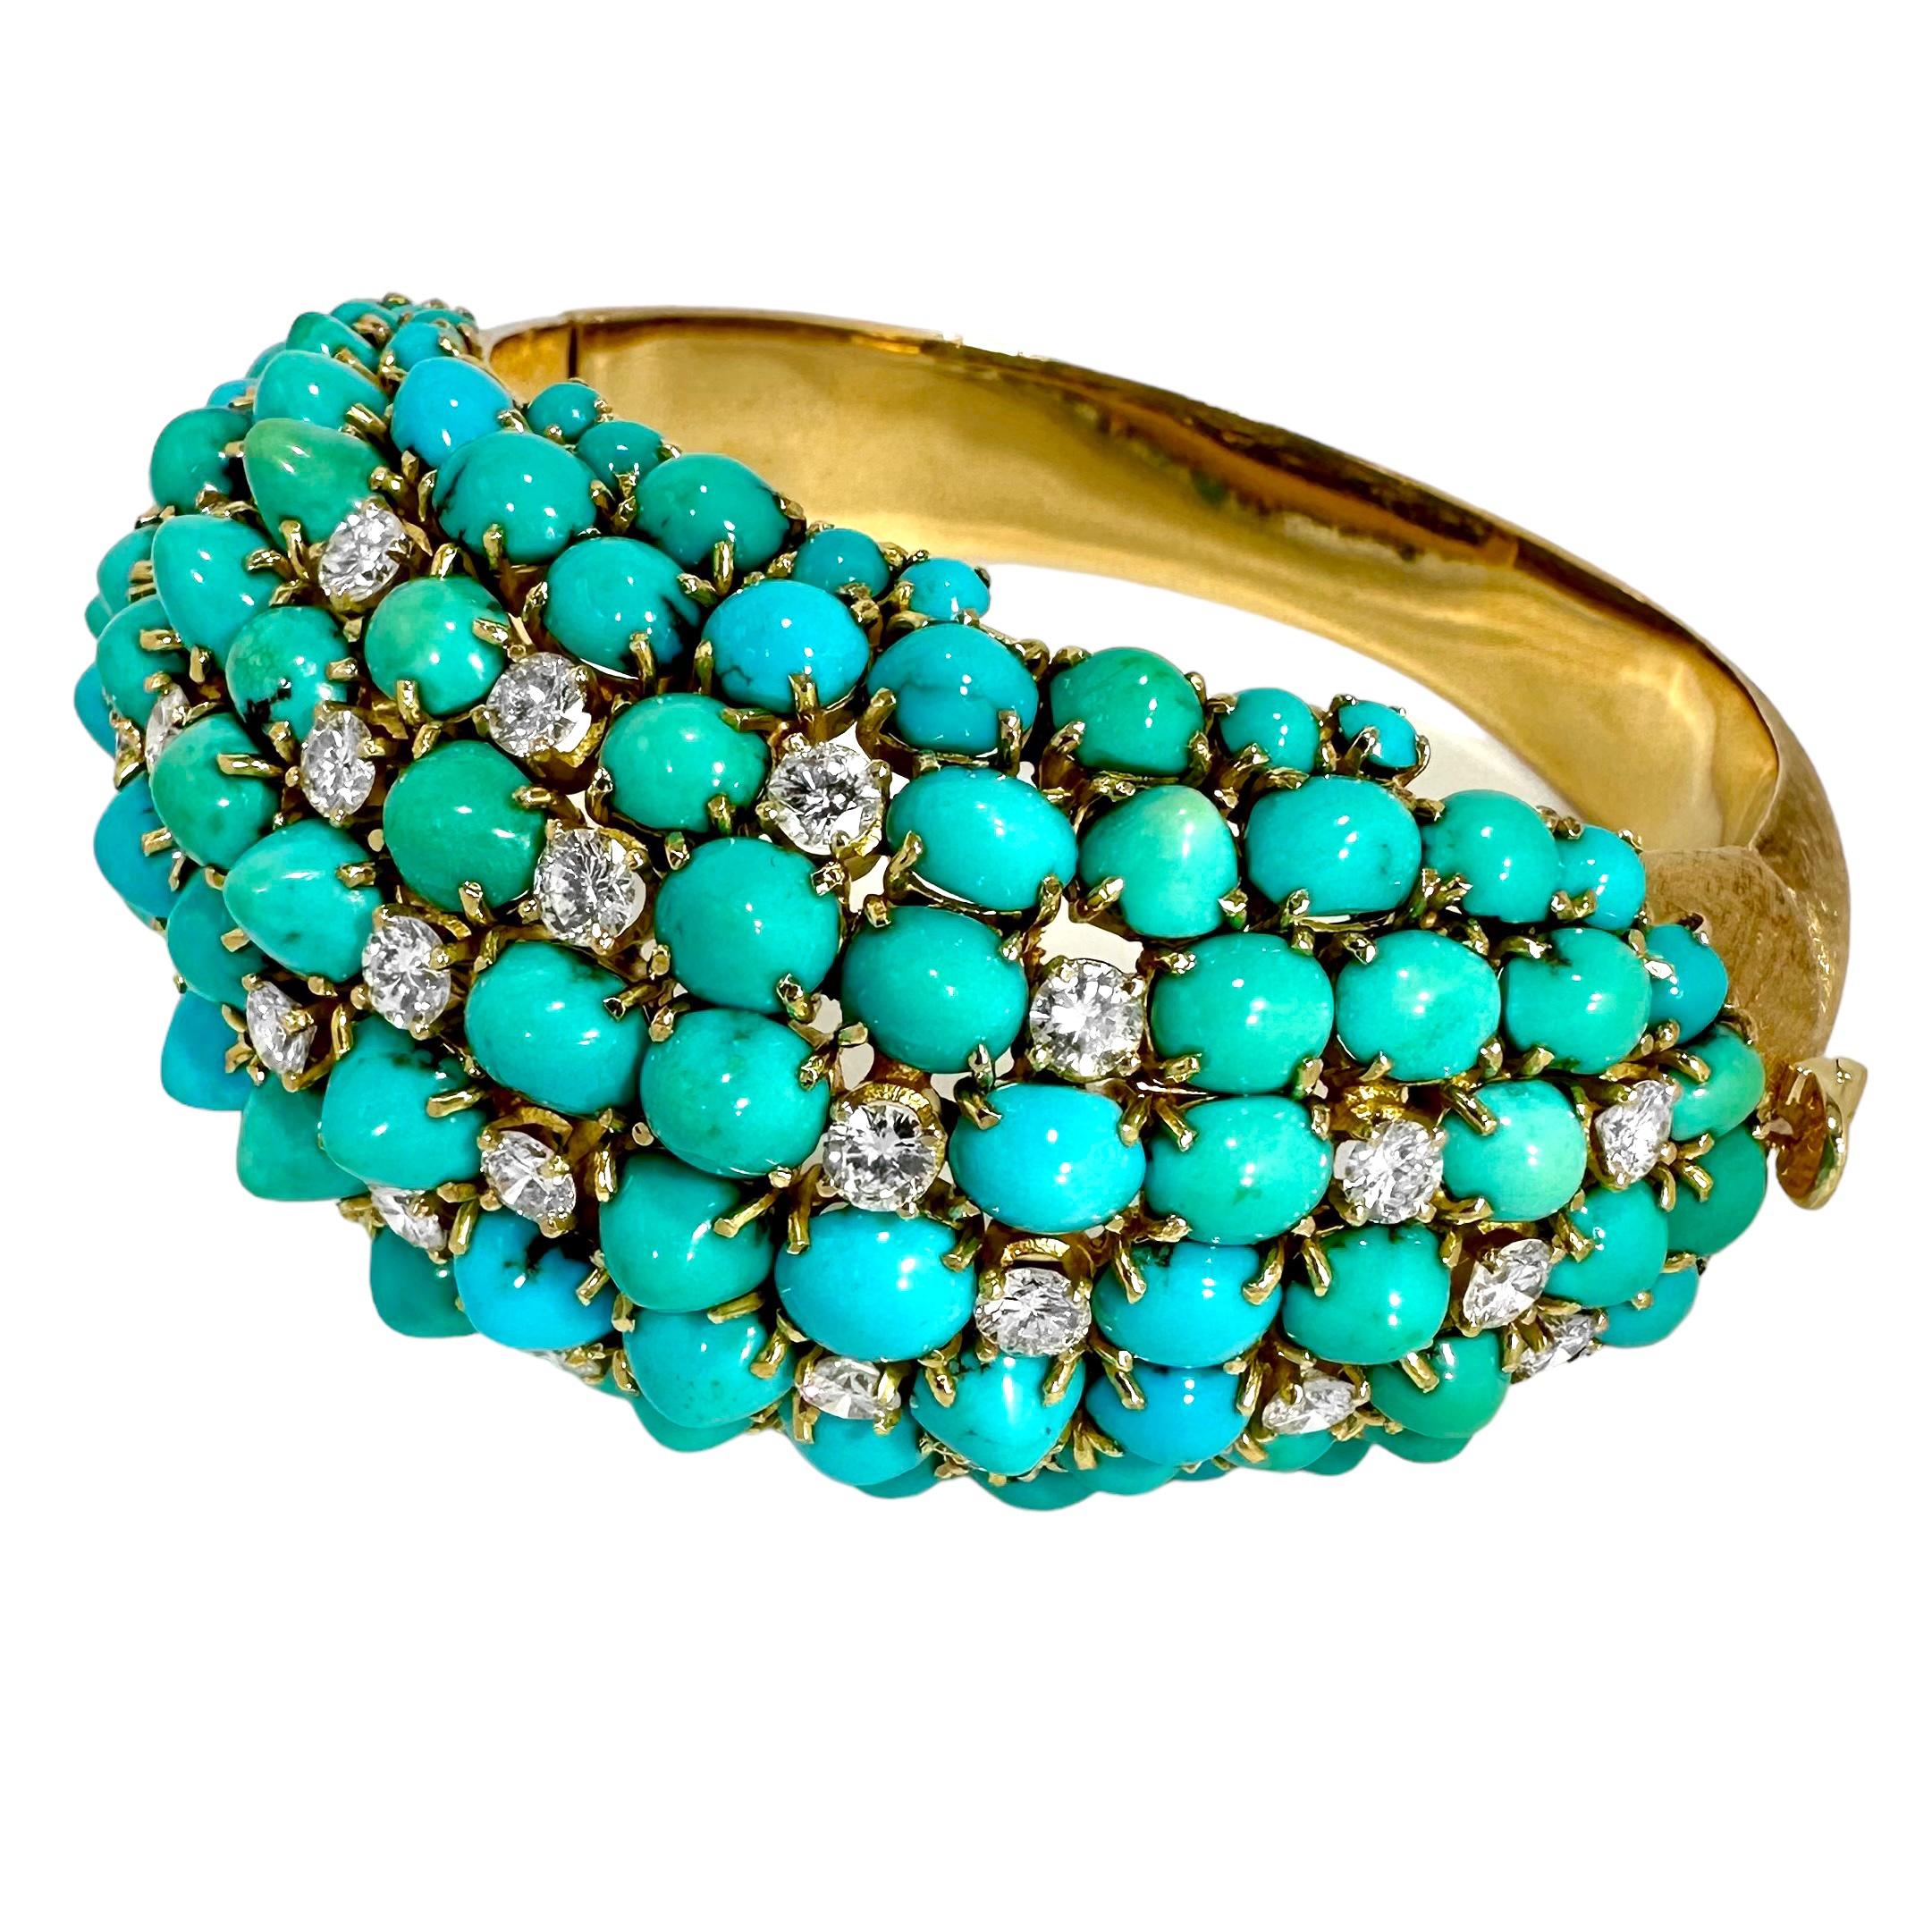 Modern Vintage, Massive Scale, Gold, Diamond and Turquoise Bombe Dome Cocktail Bracelet For Sale